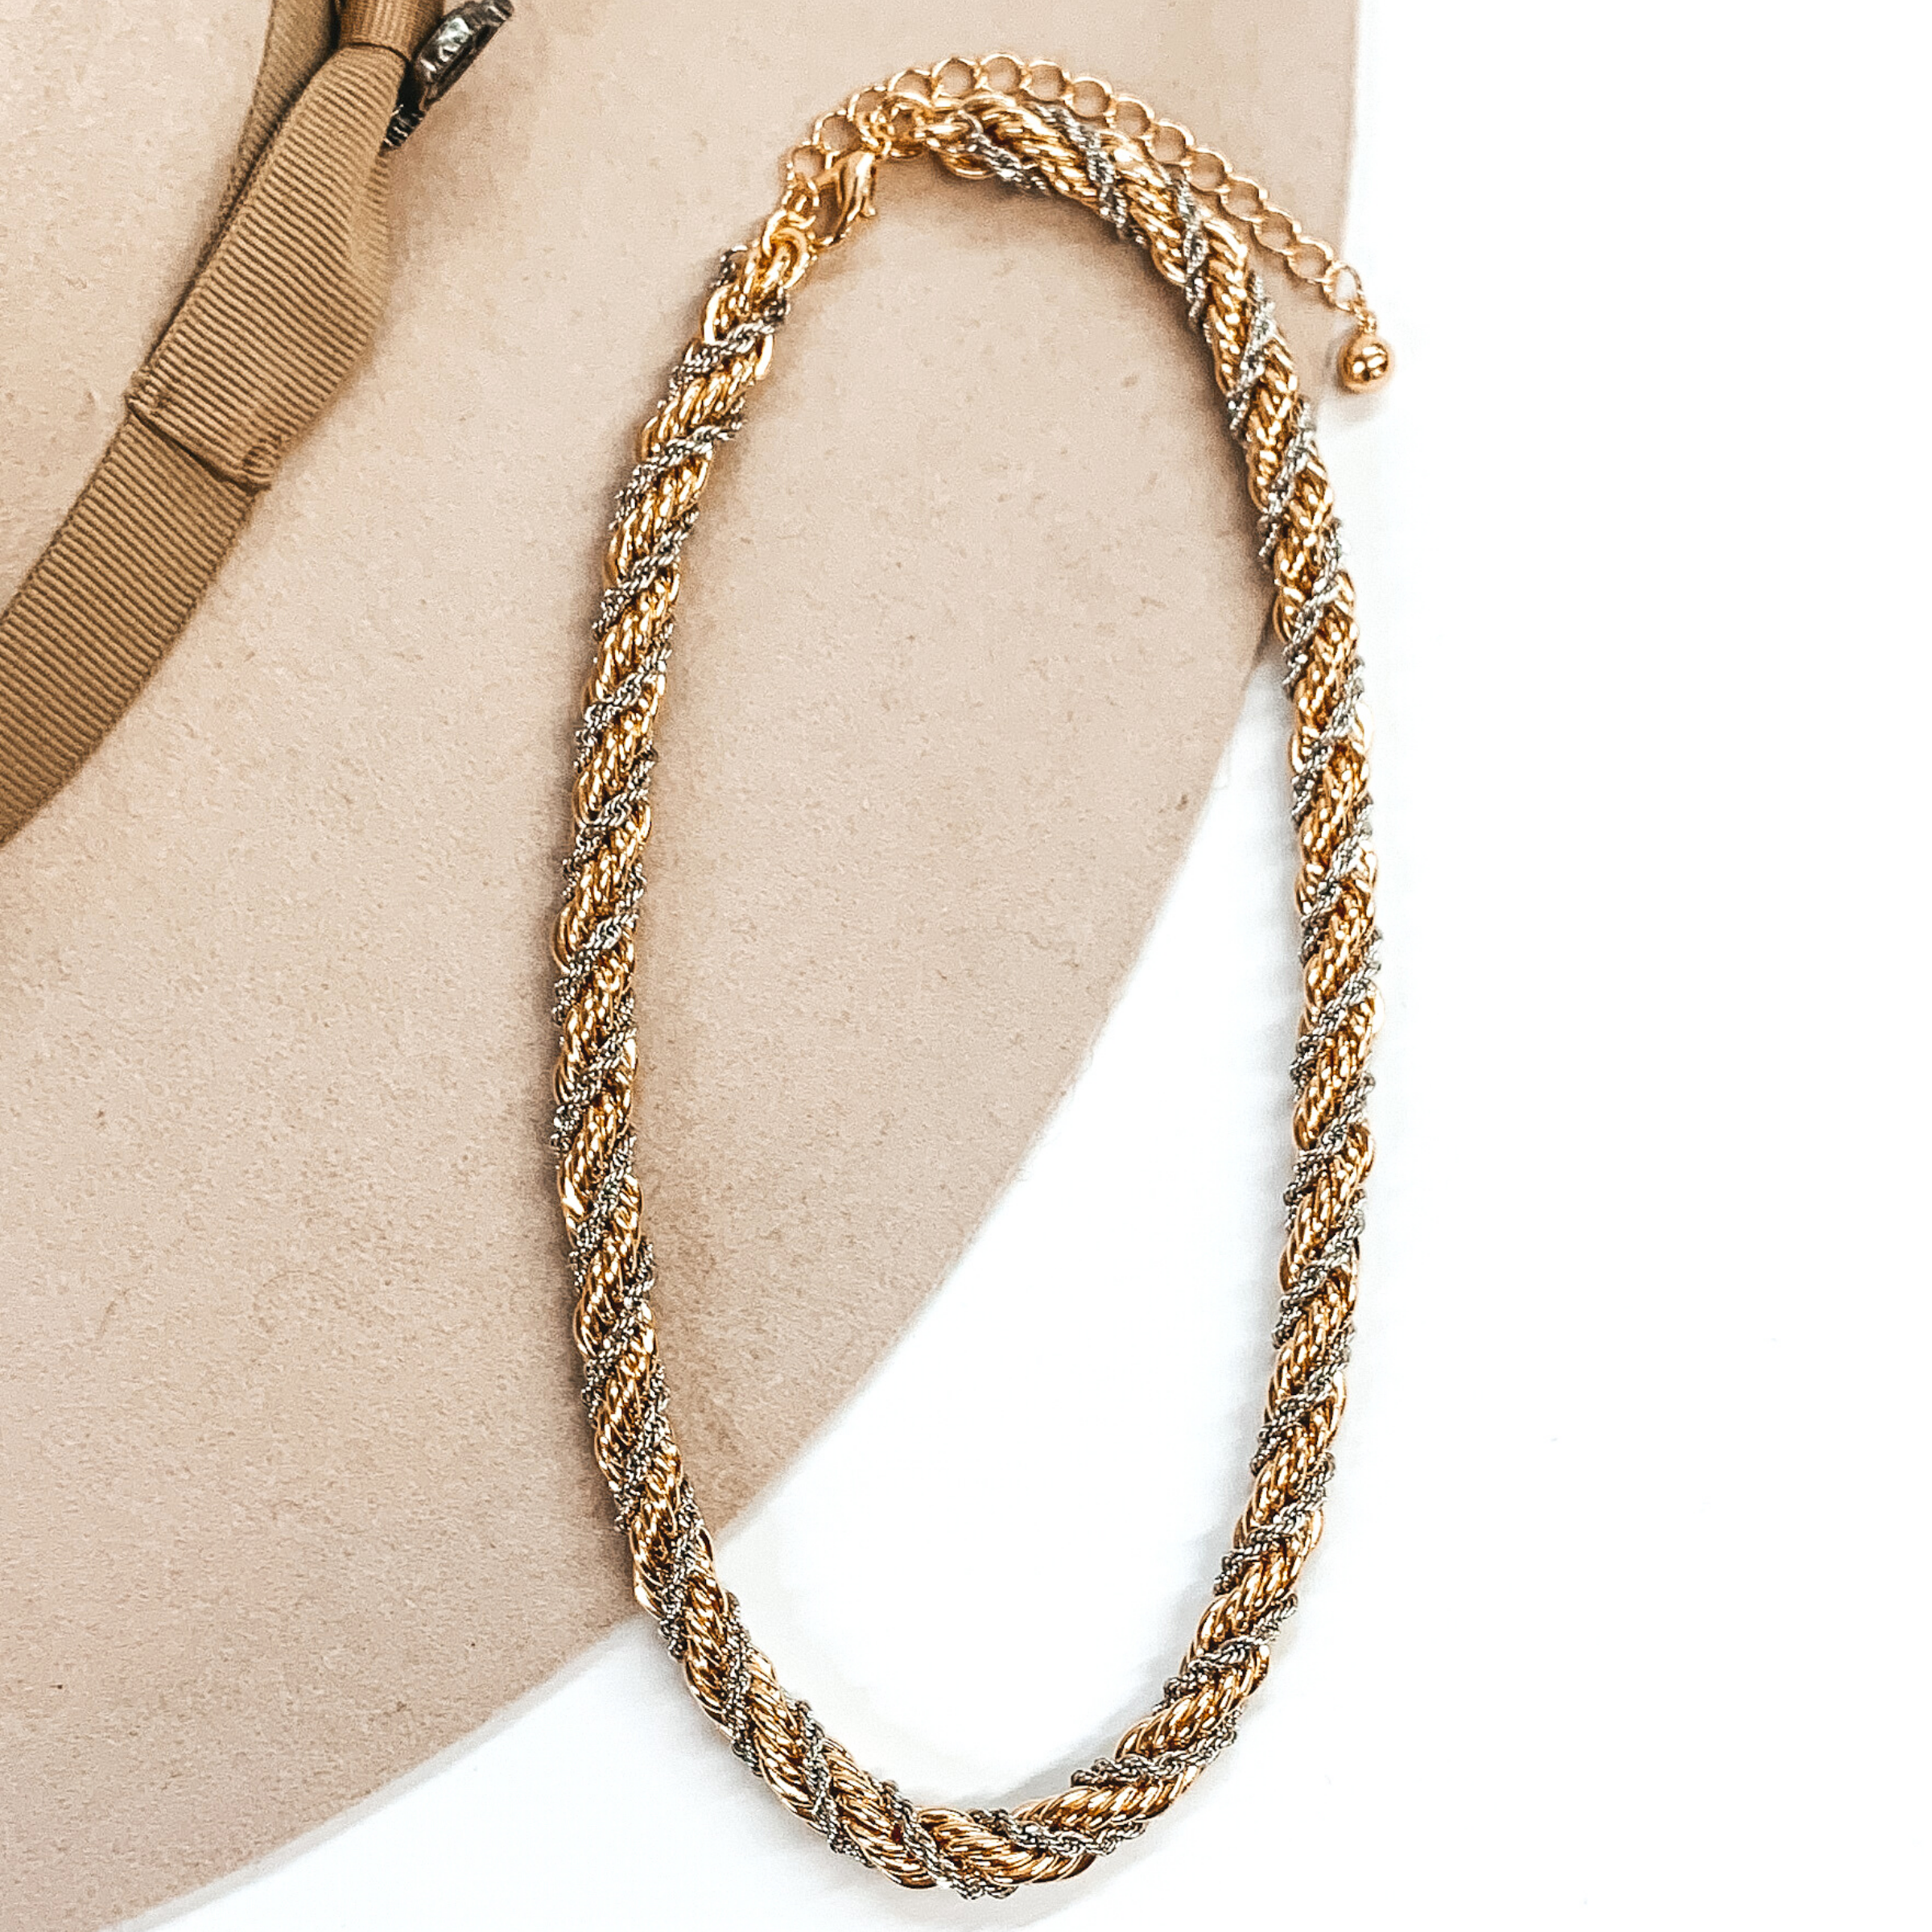 Double twisted rope chained necklace. This necklace includes a gold strand and a silver strand. This necklace is pictured laying in a beige colored hat on a white background. 